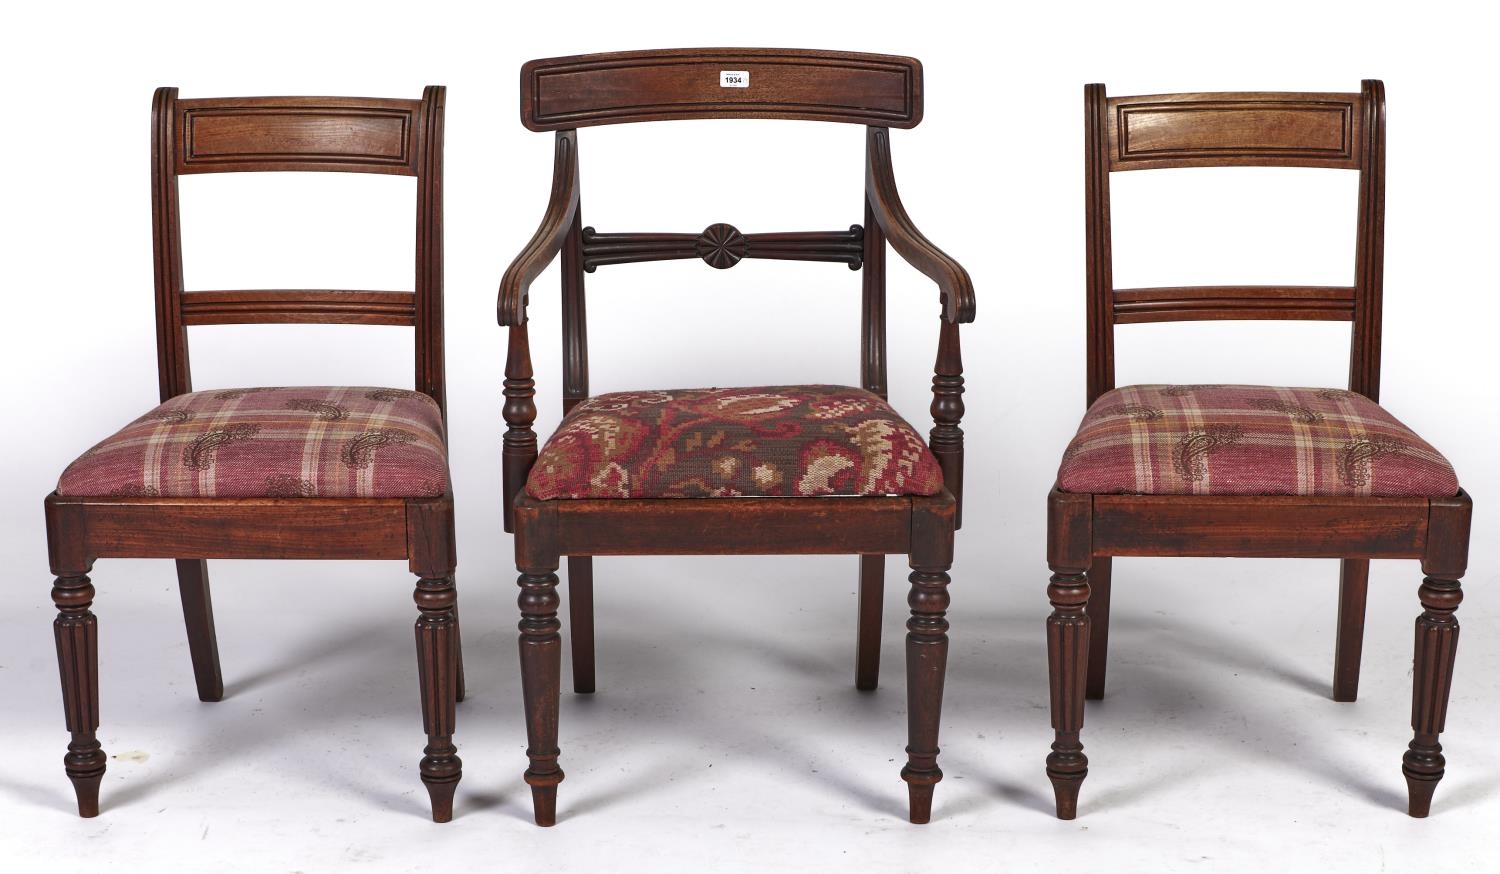 A post Regency mahogany scroll arm elbow chair, with tablet top rail, the horizontal rail centred on